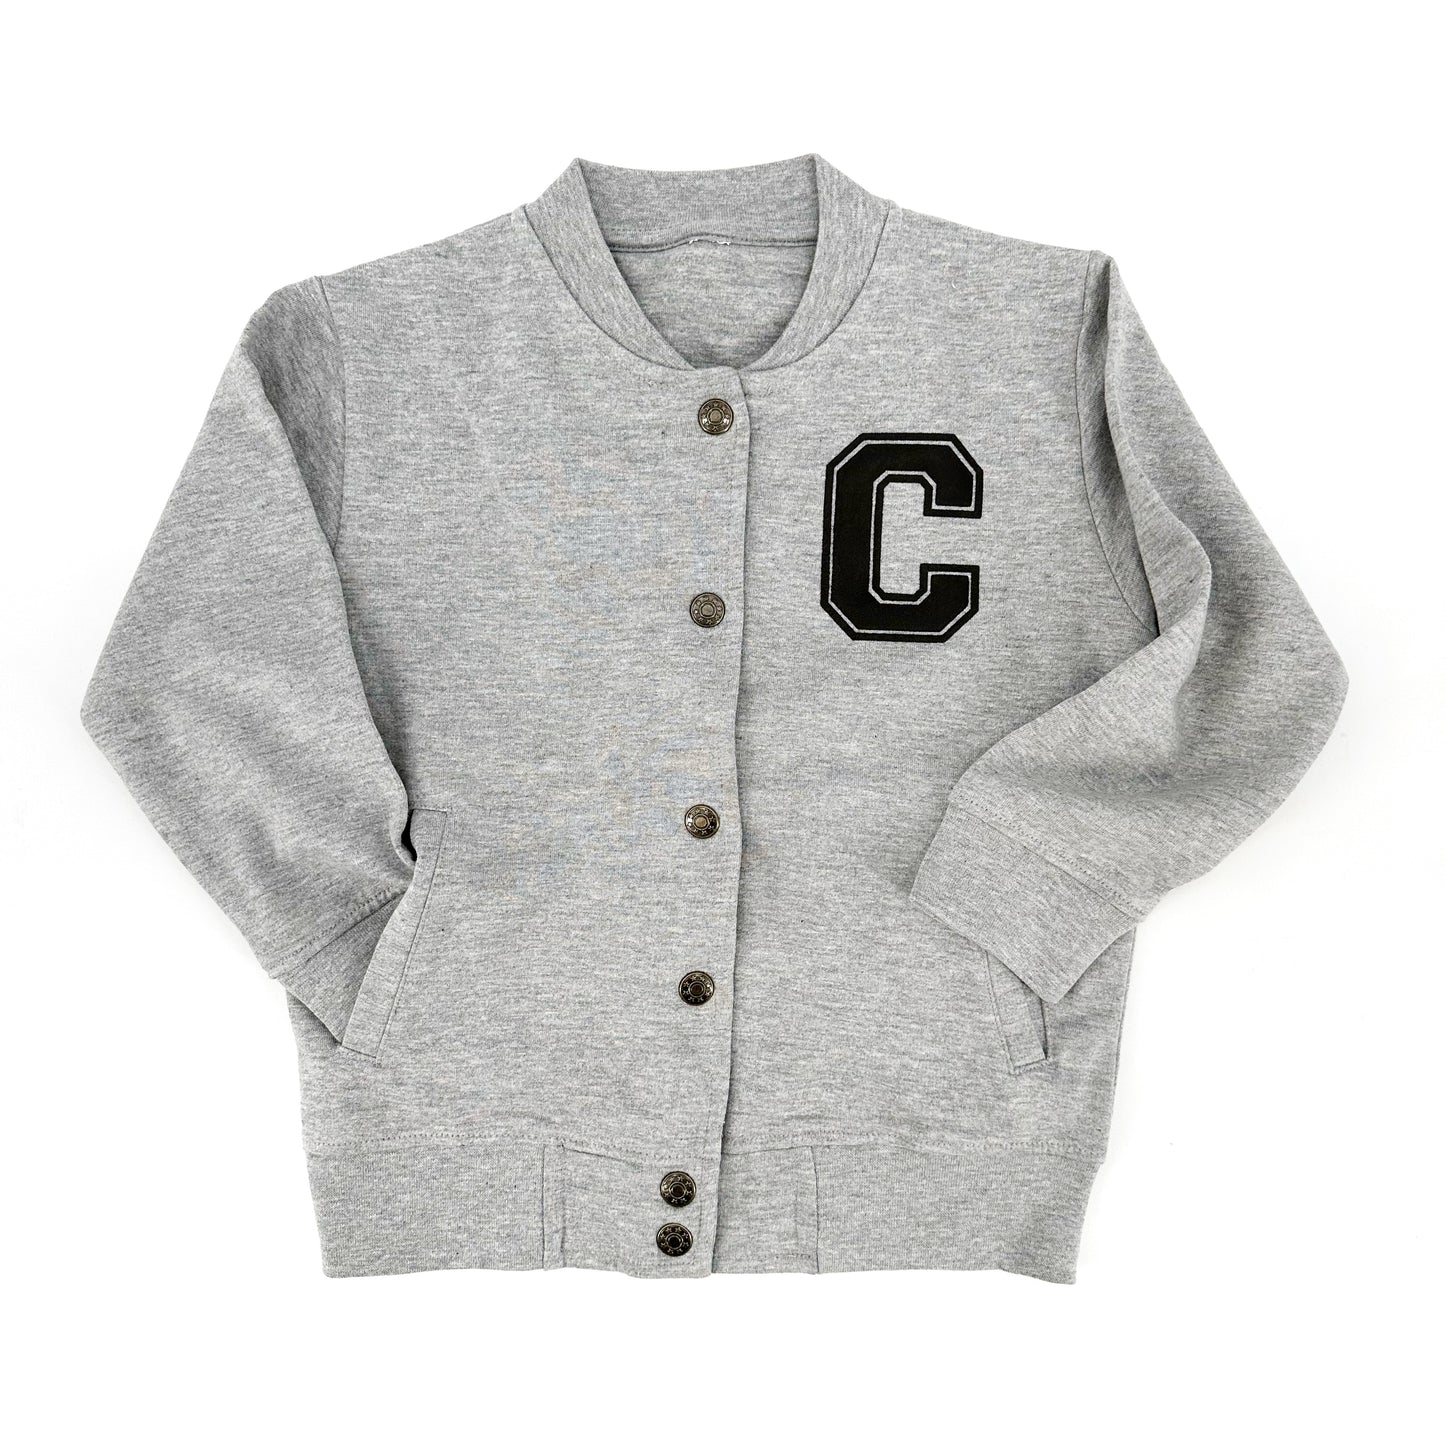 Personalized Letter Jacket